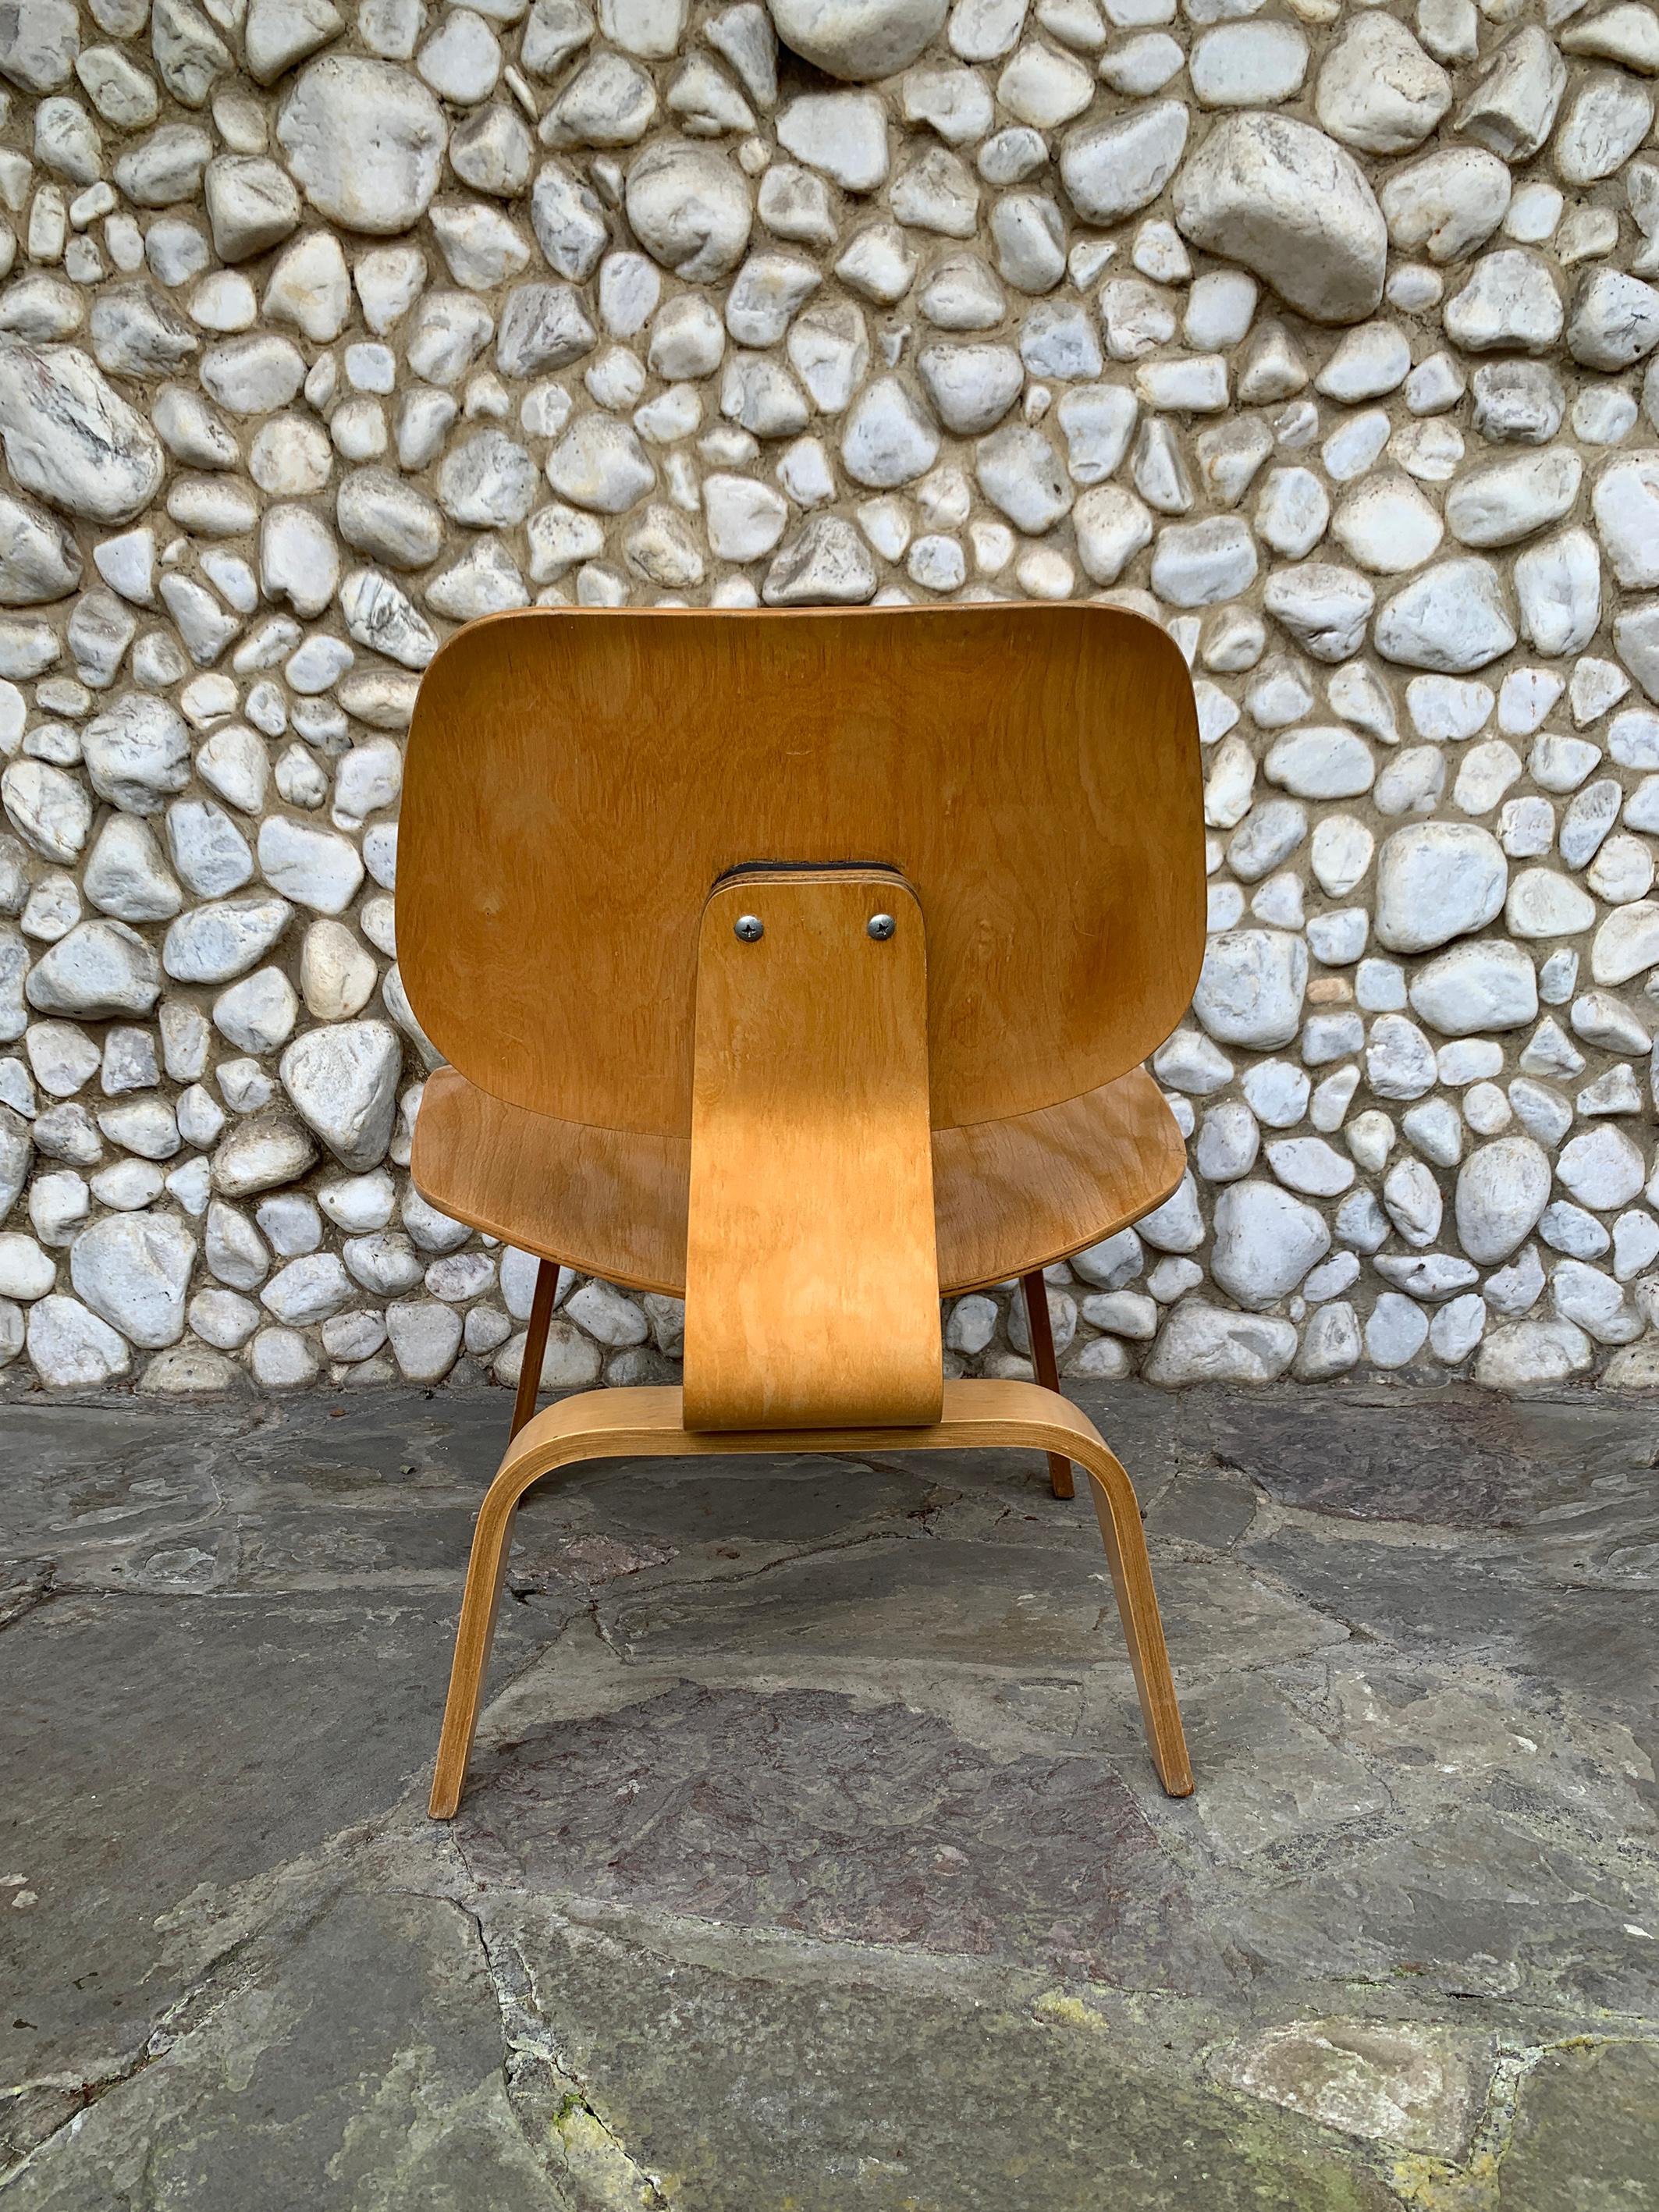 early eames chair